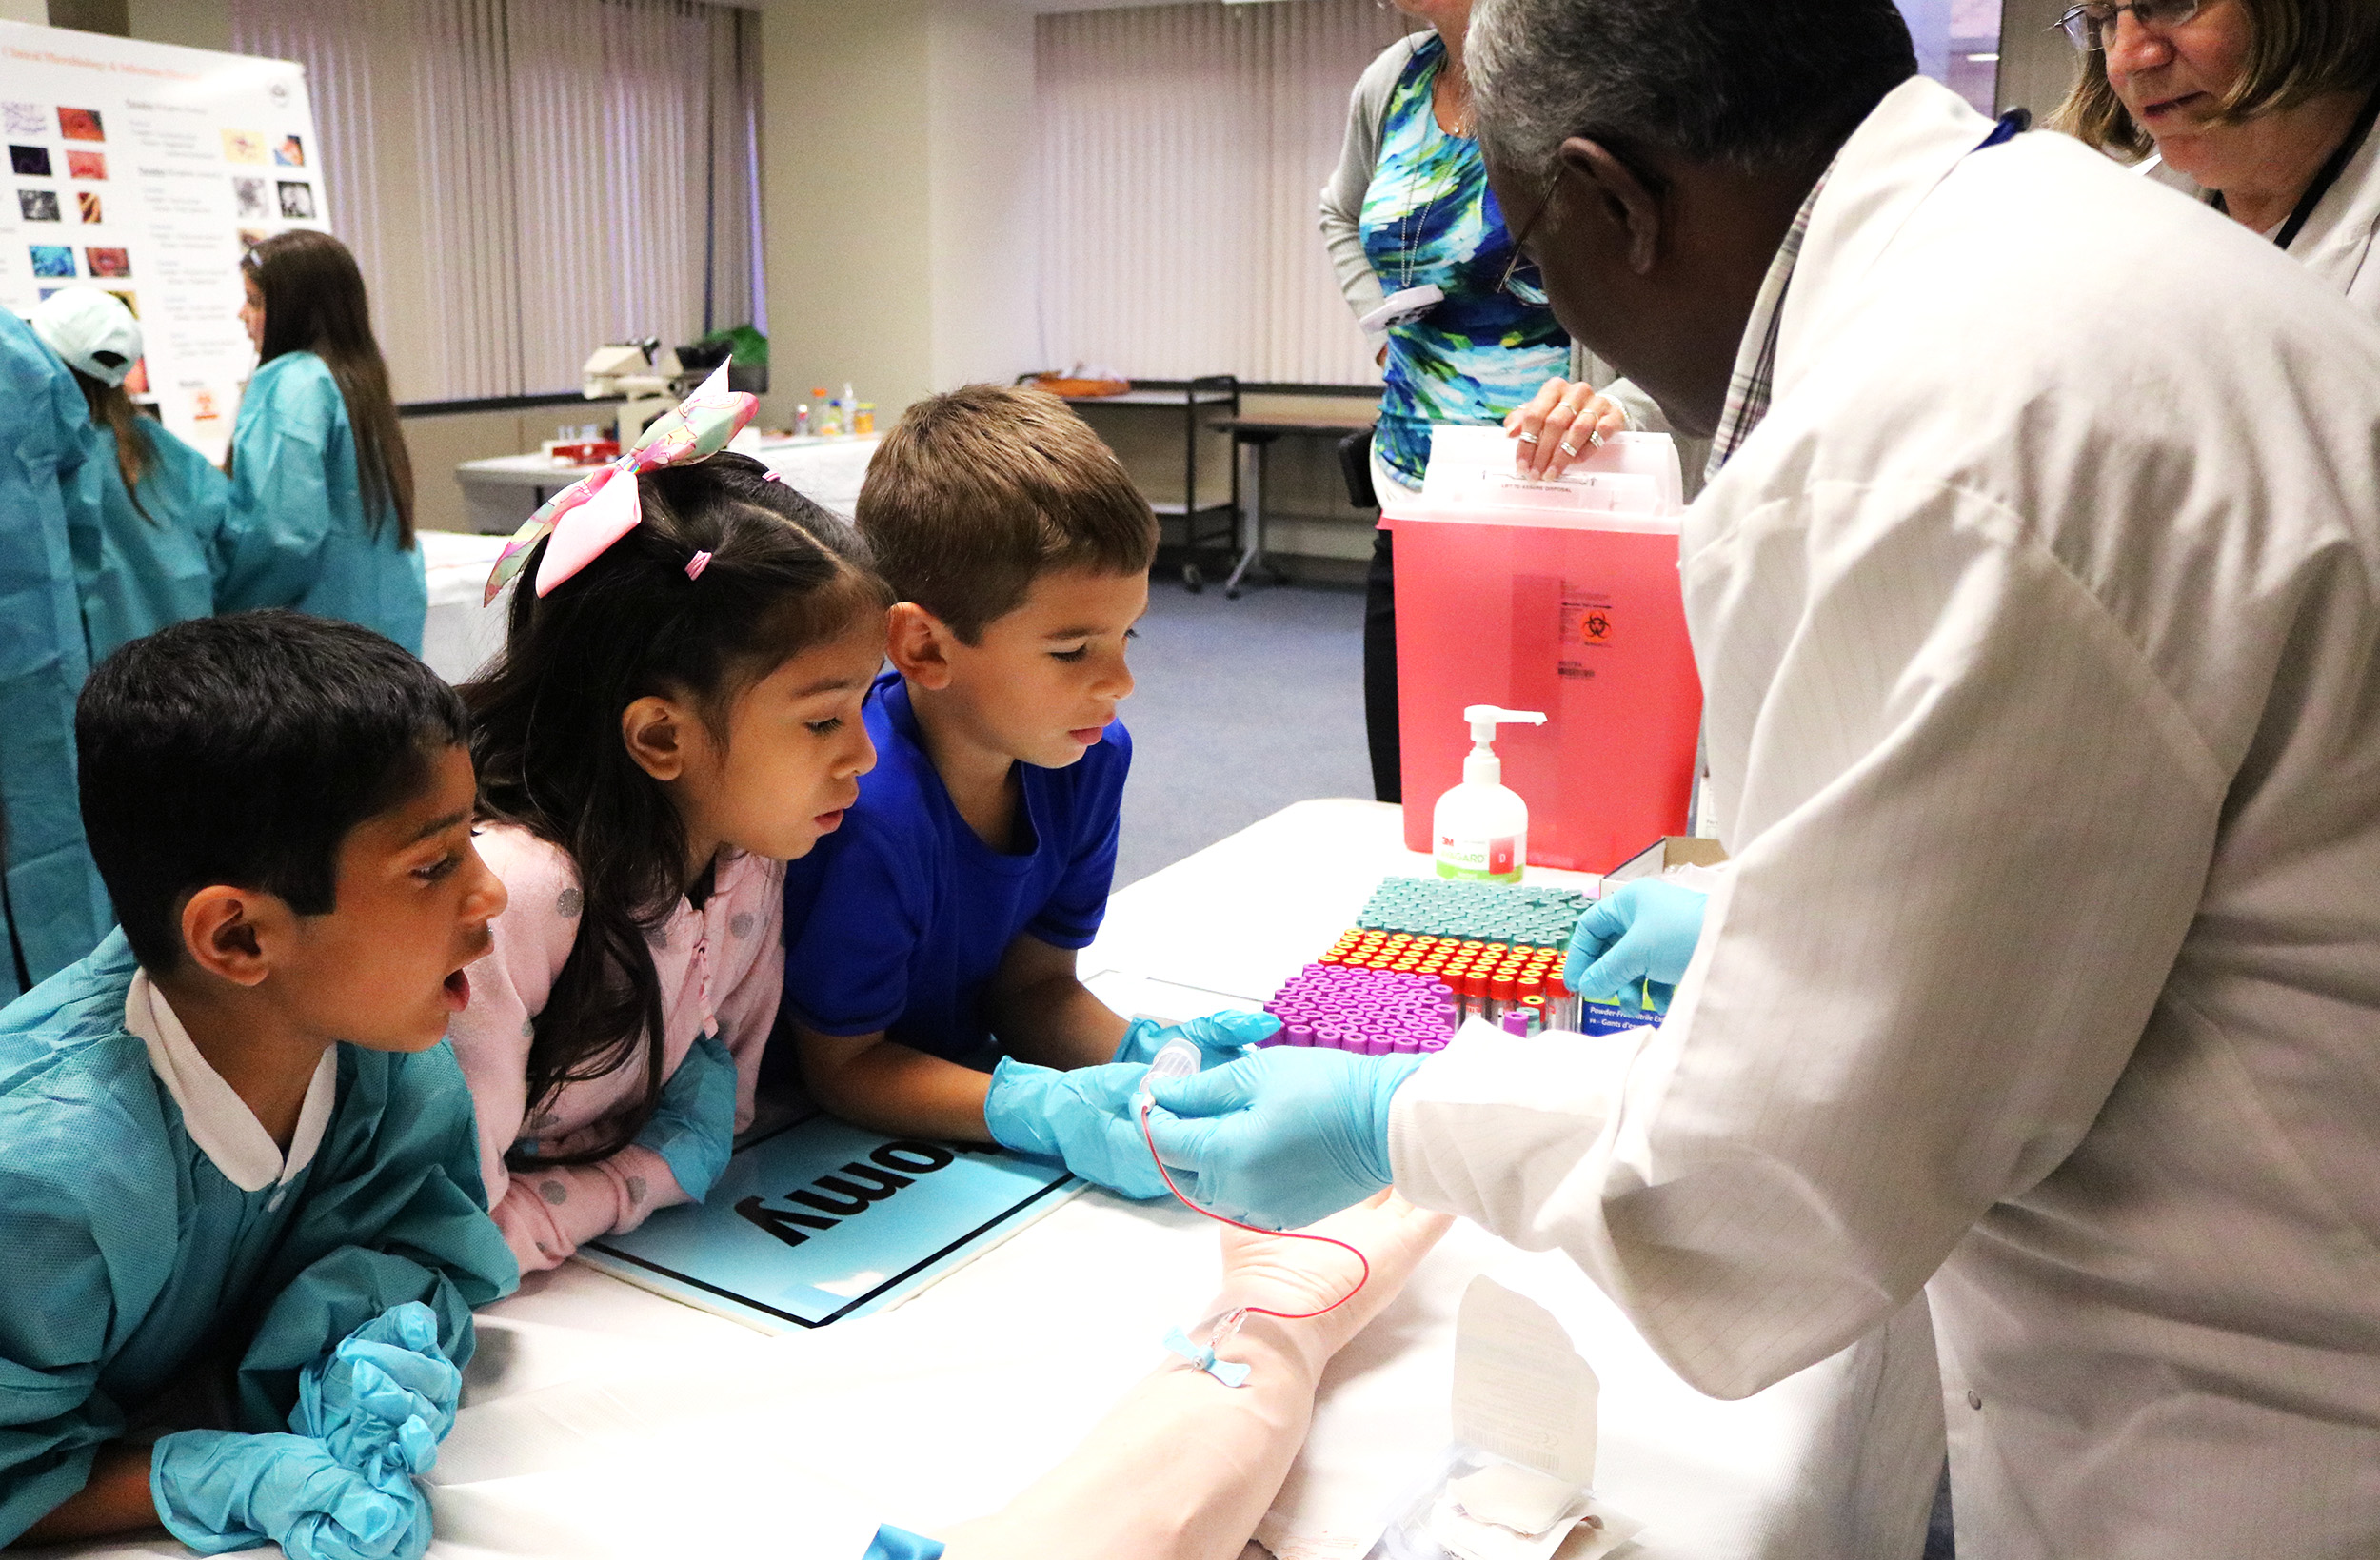 "Super Siblings" learn about phlebotomy